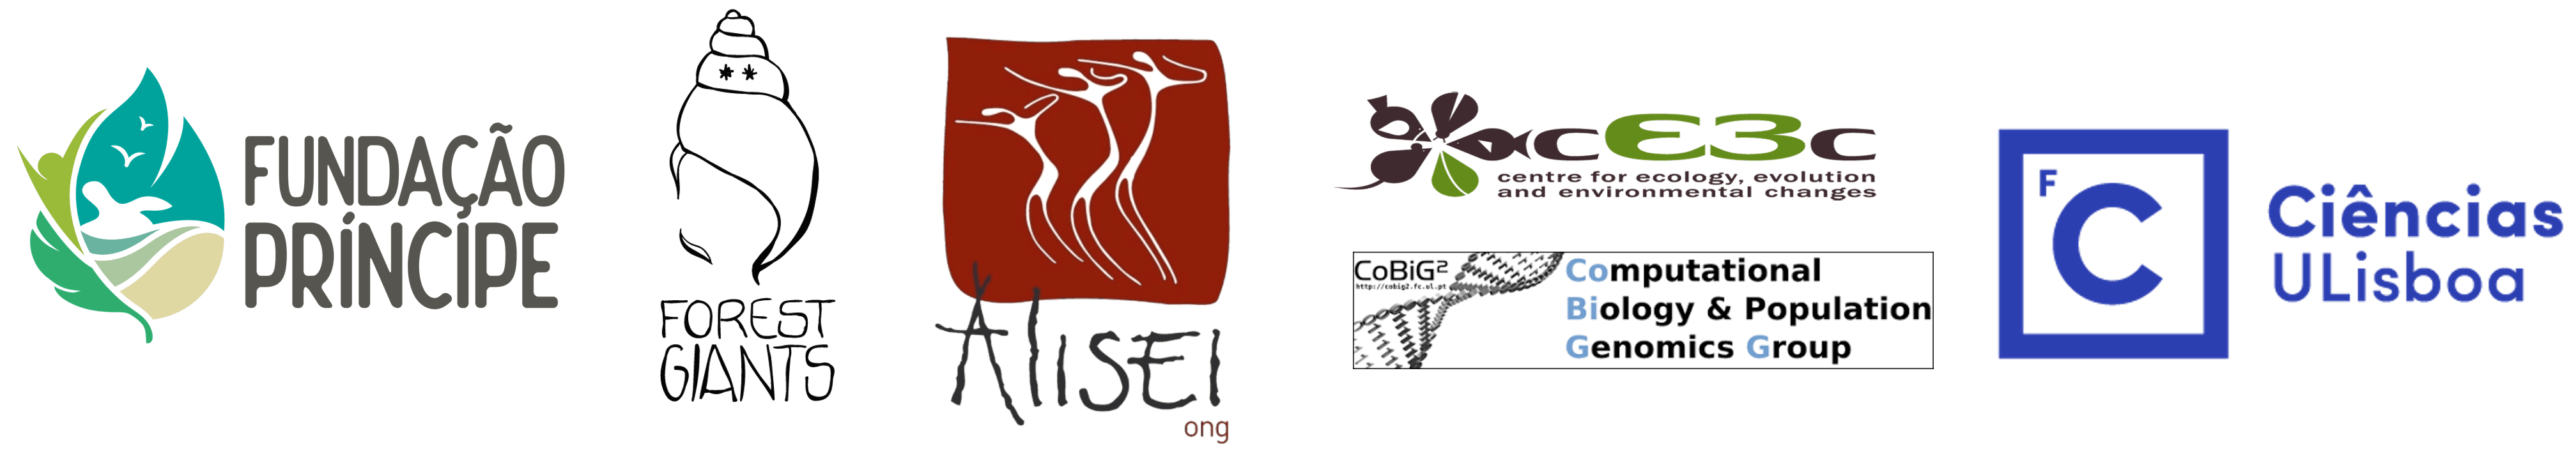 Logos of the project partners for mossy earth Obô giant snail conservation work.